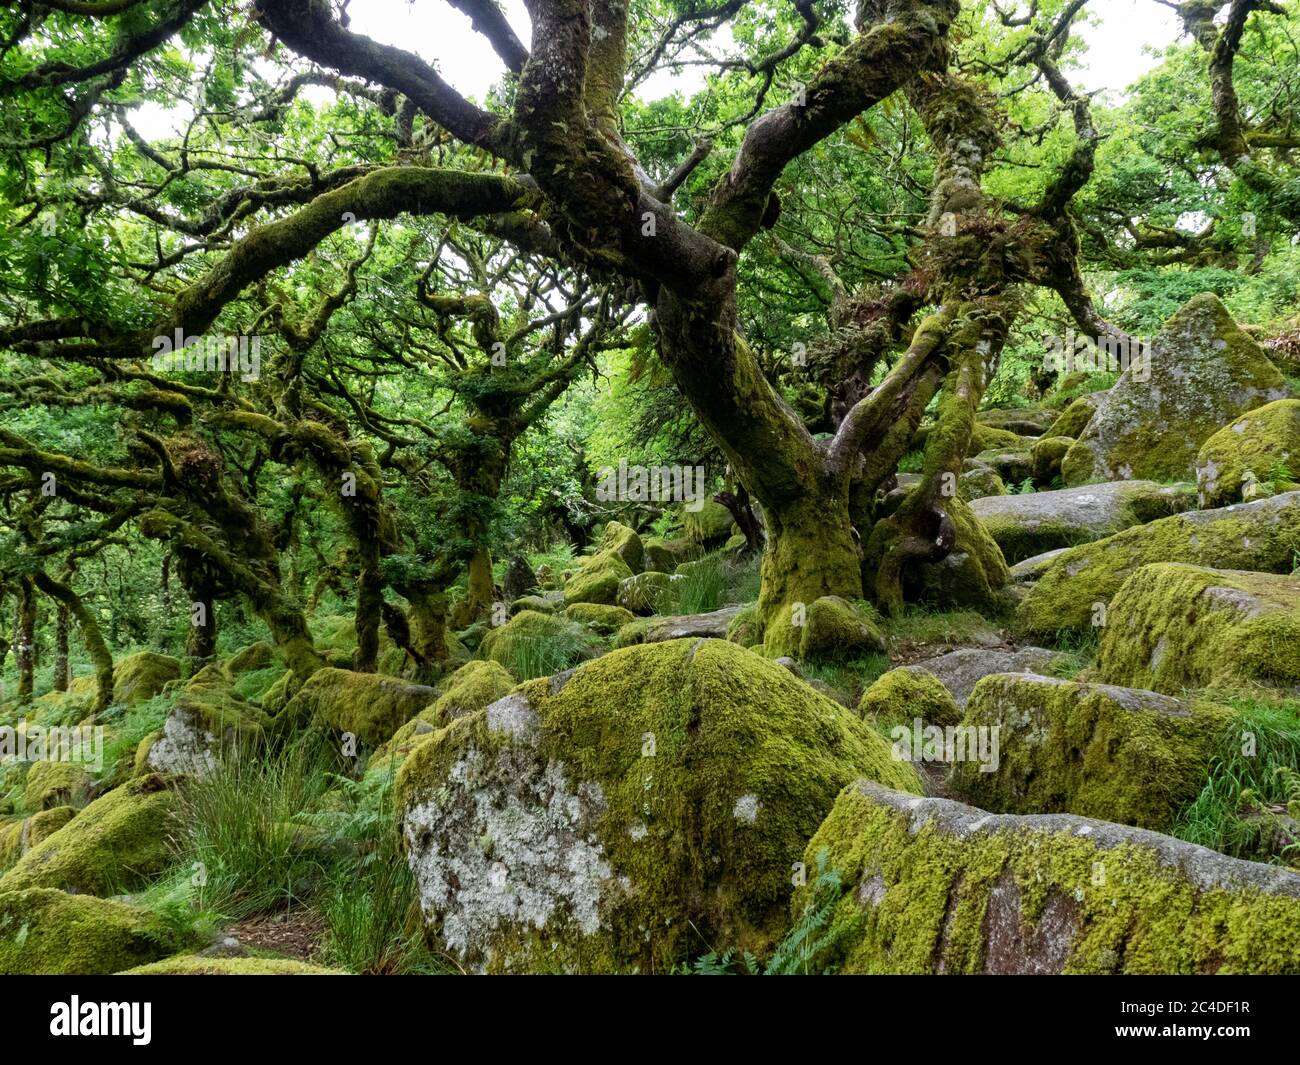 Wistman's Wood is an Oak woodland on Dartmoor, important for the mosses and lichens that grow on the trees and the granite rocks, Dartmoor, Devon, UK Stock Photo